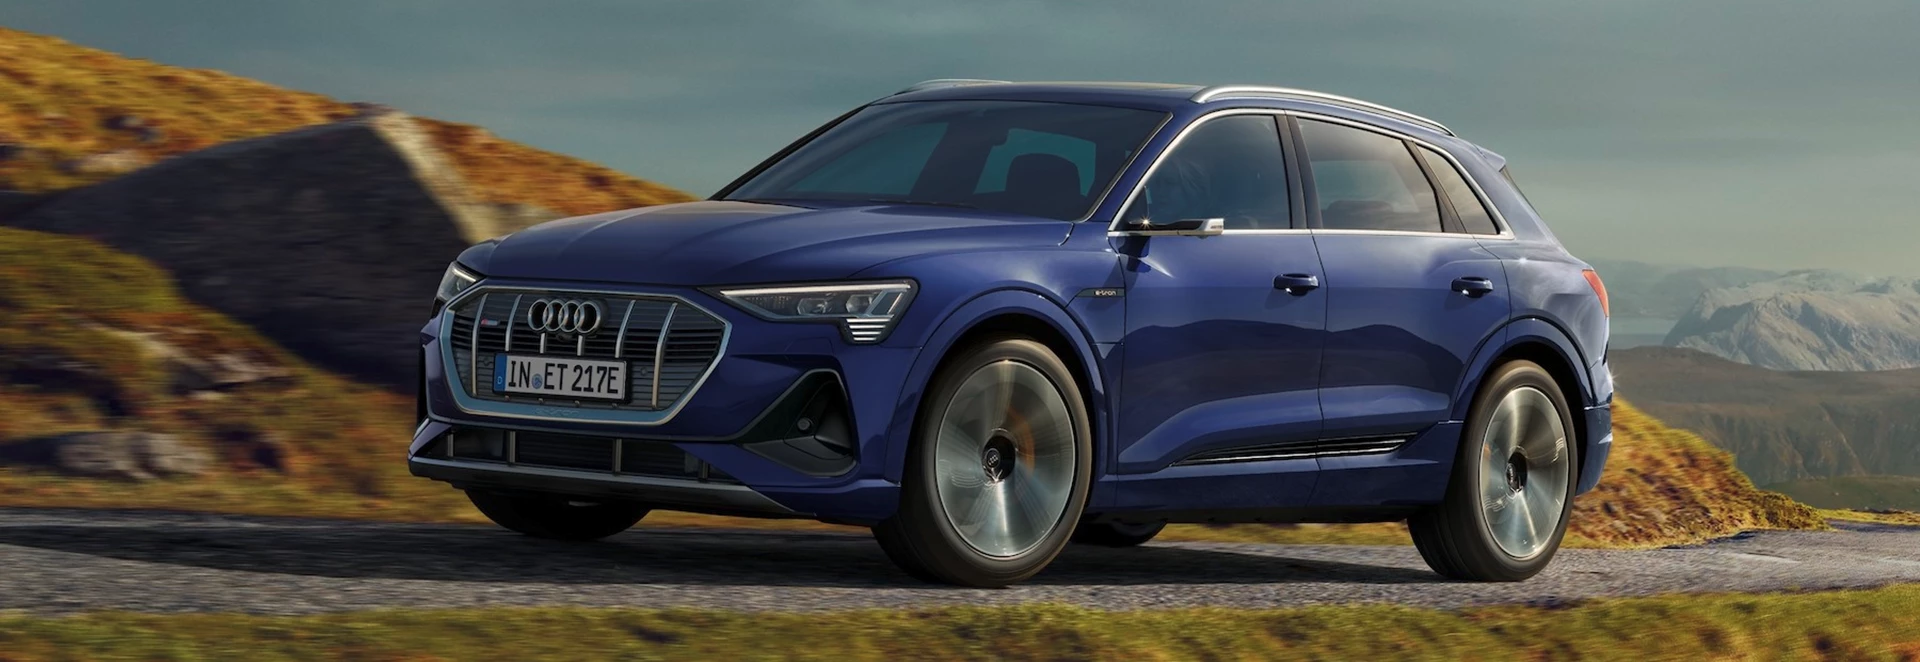 Audi announces model year updates for its electric e-tron SUV